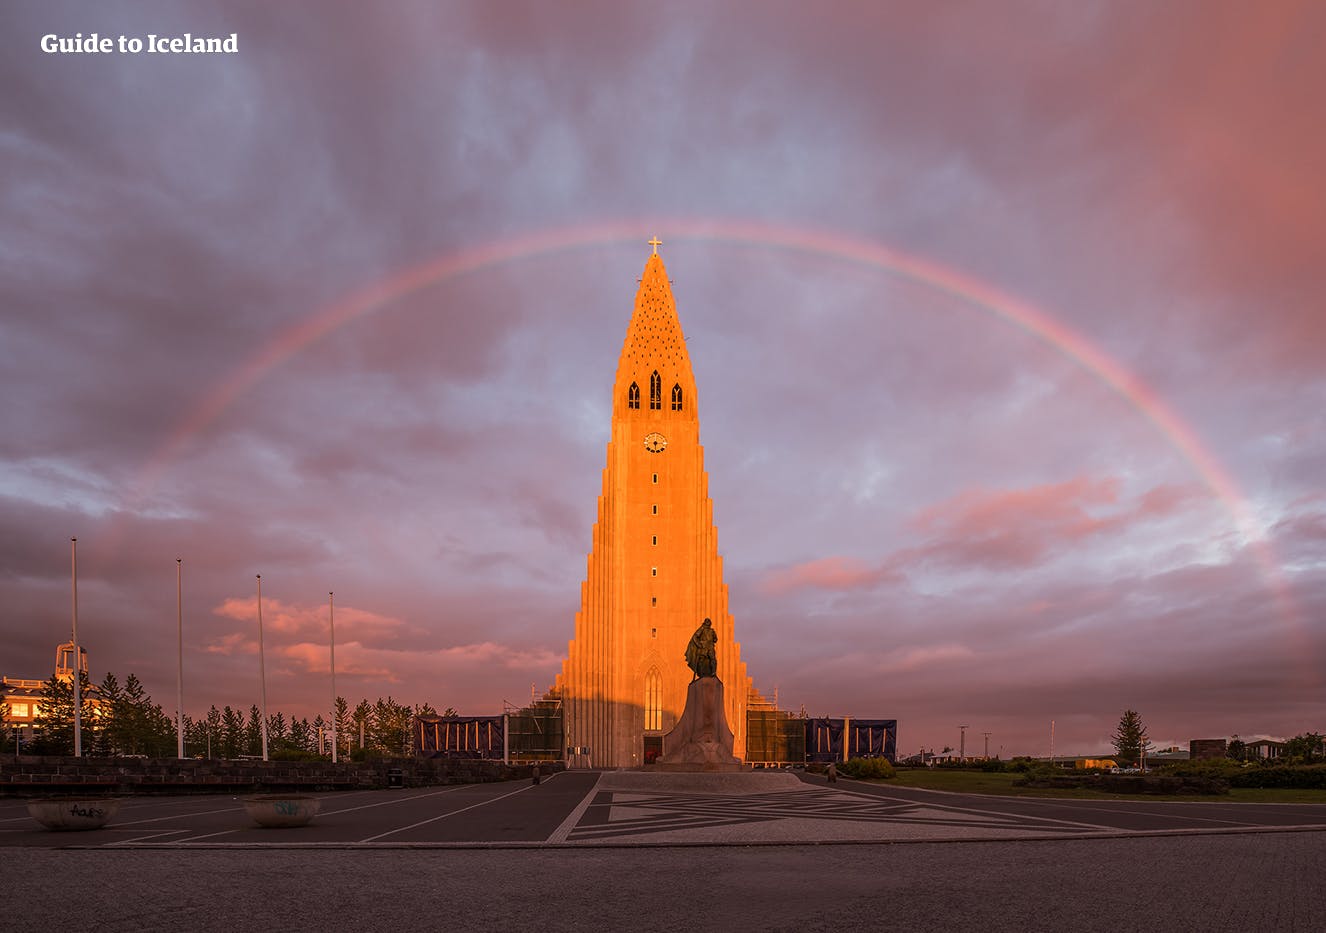 Hallgrímskirkja Lutheran Church is one of the most iconic attractions in Reykjavík, Iceland.